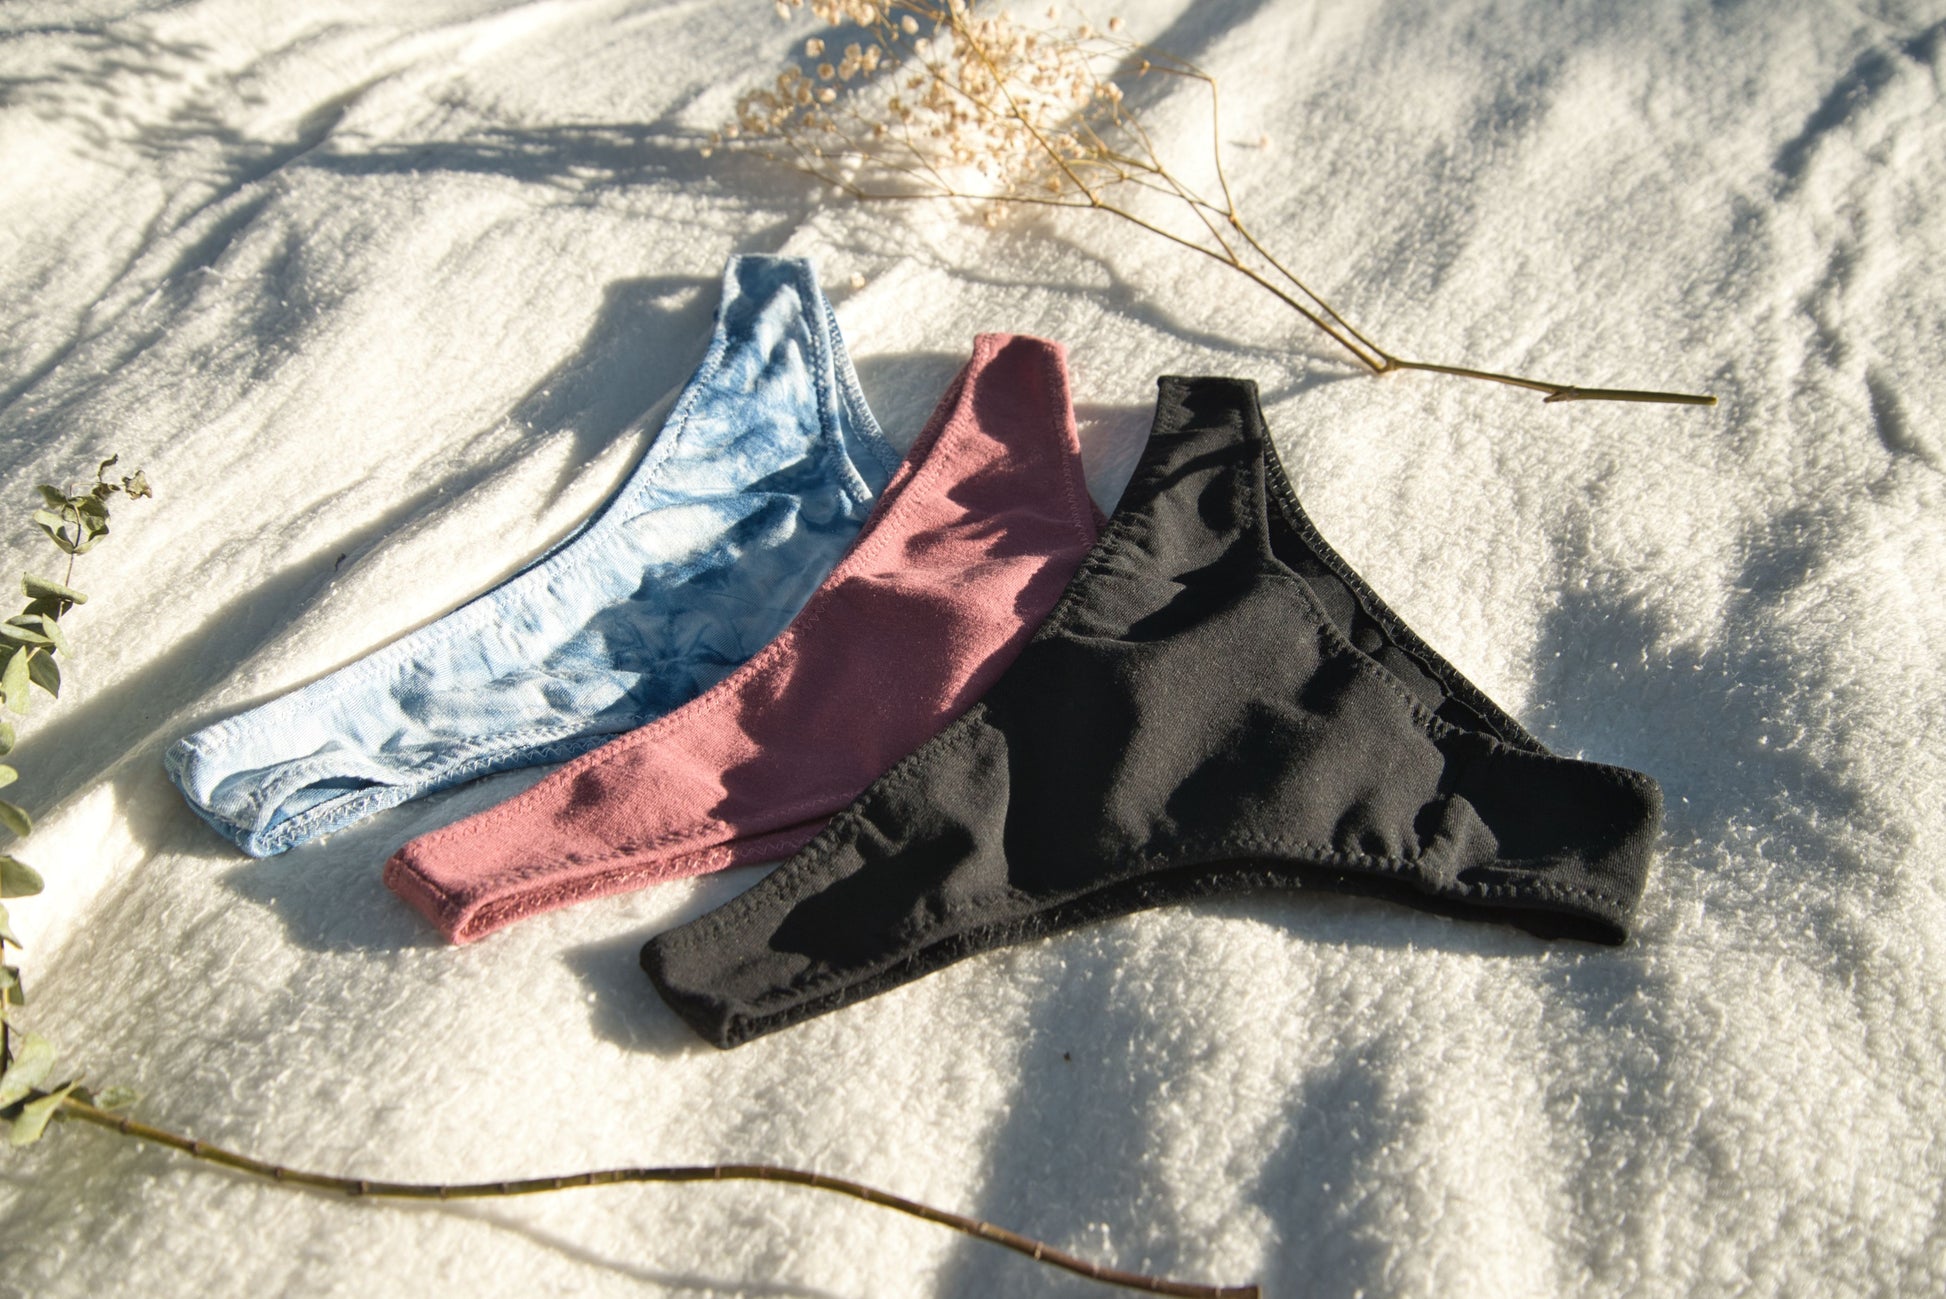 Comfortably crafted from a blend of organic cotton and bamboo, these soft lingerie pieces feel like nothing against your skin, with a super-soft and gentle fit. Supporting a healthy planet, these underwear are ethically made from scratch